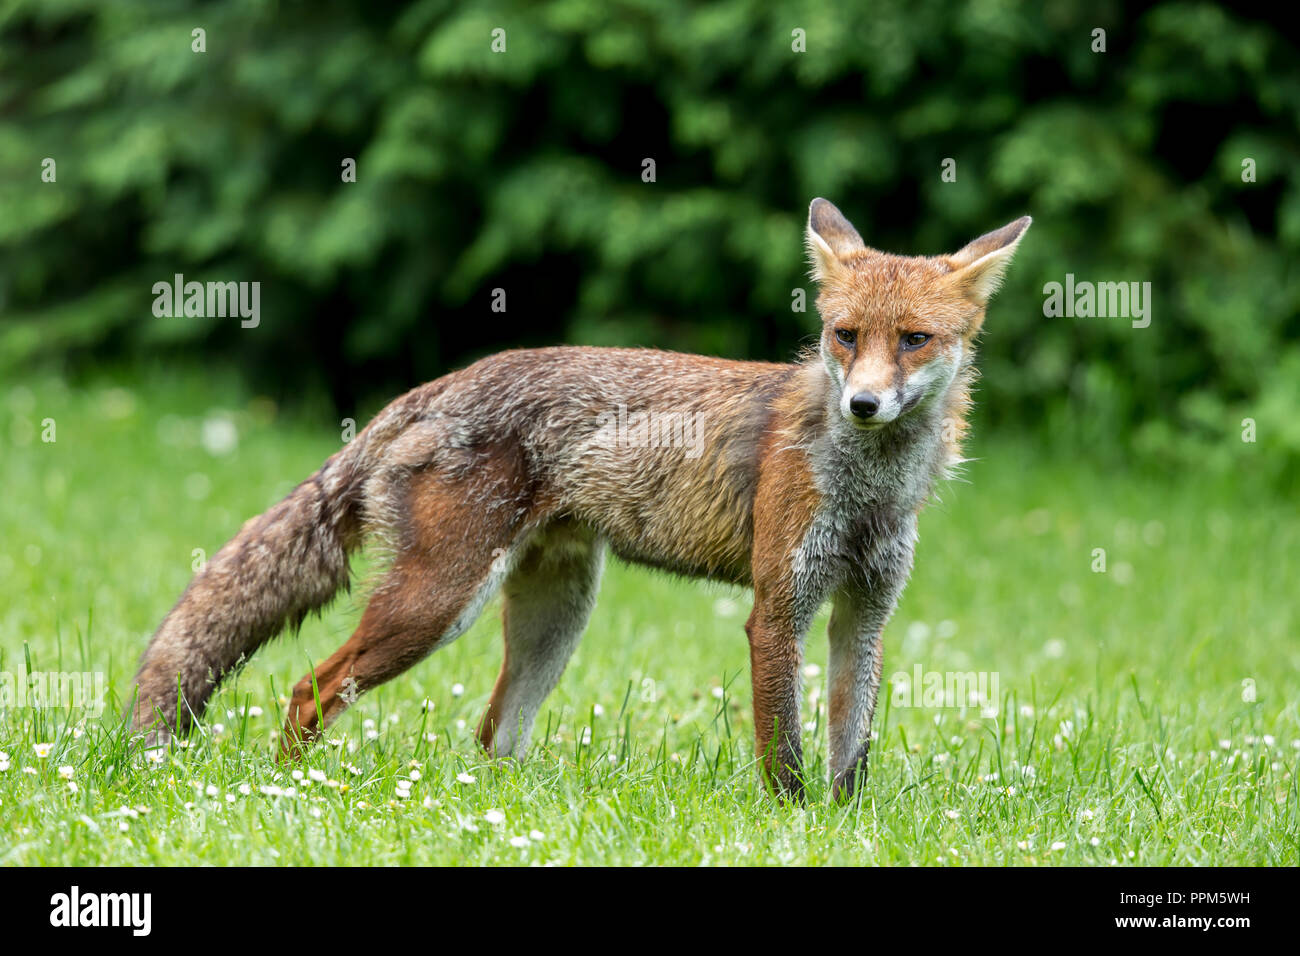 An urban red fox in the park during the day Stock Photo